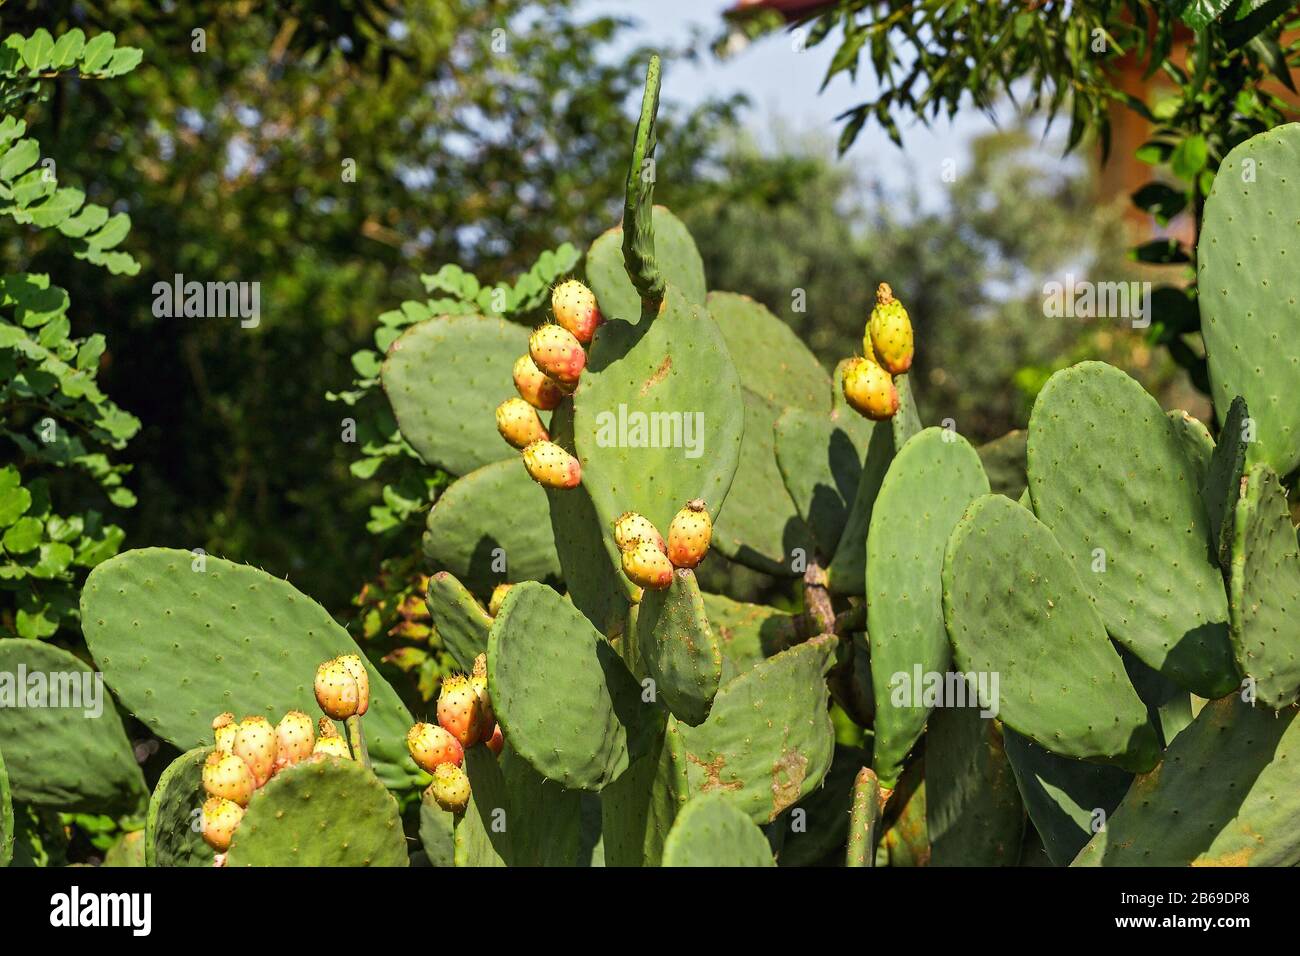 Prickly pear cactus close up with eatable fruits Stock Photo